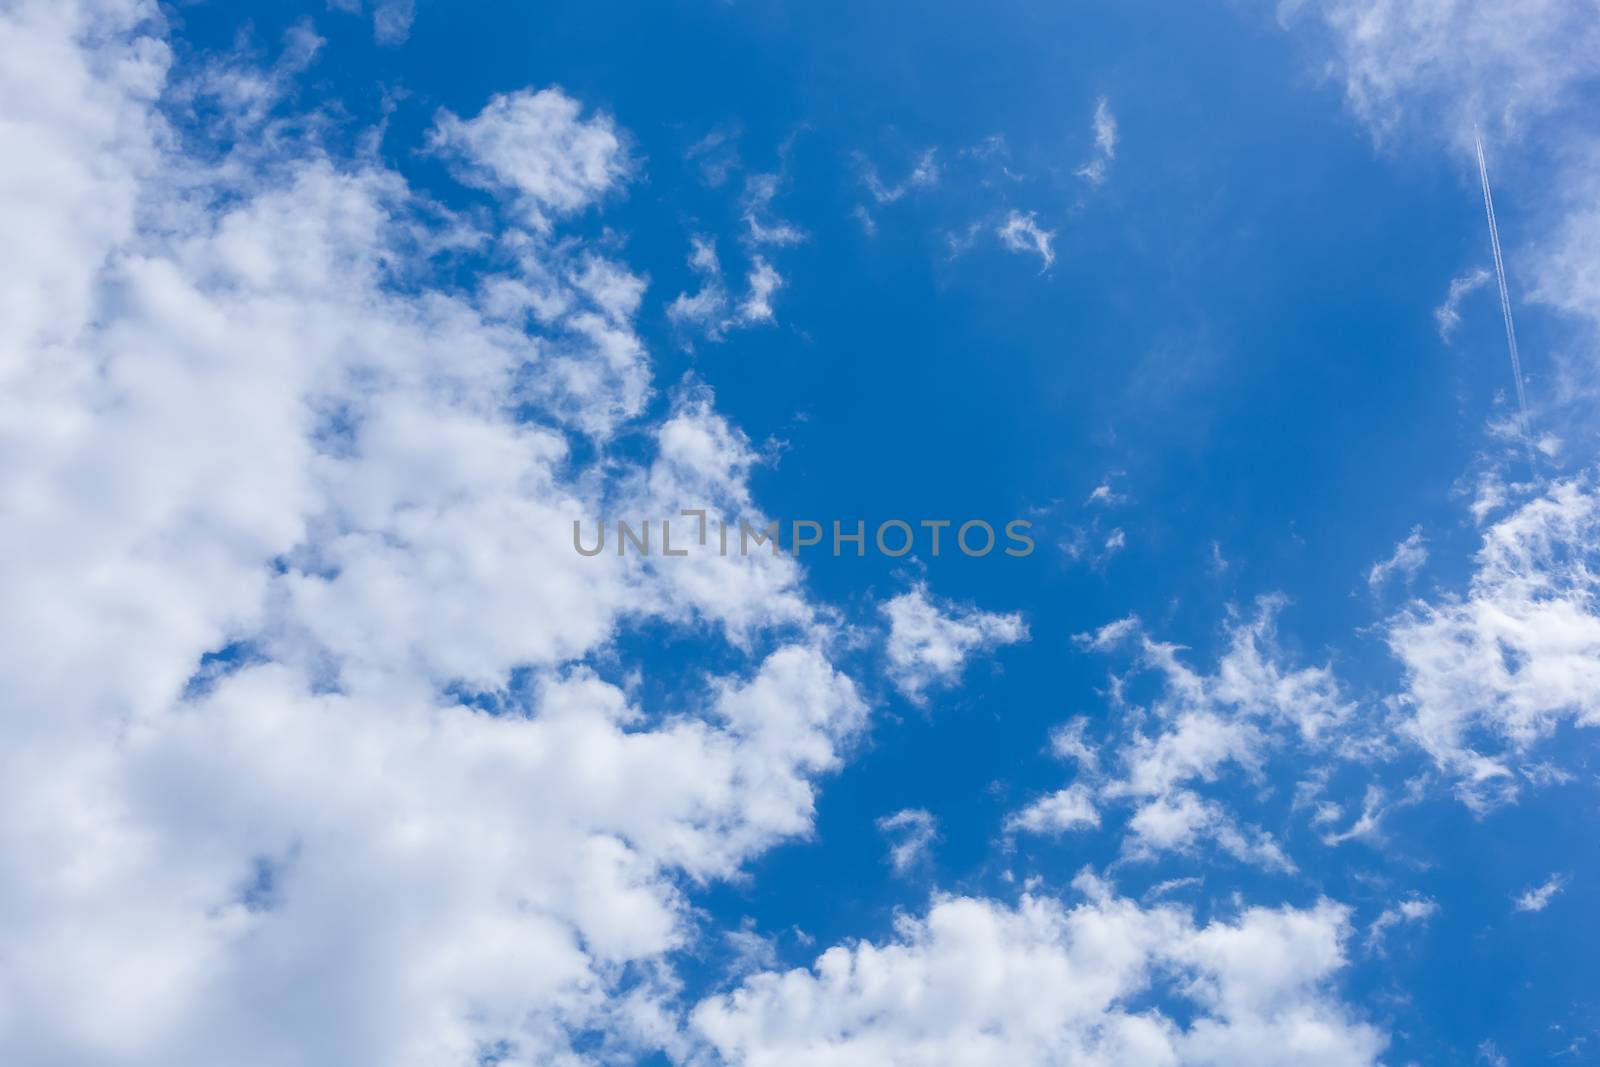 Clouds and jet plane passing on blue sunny sky